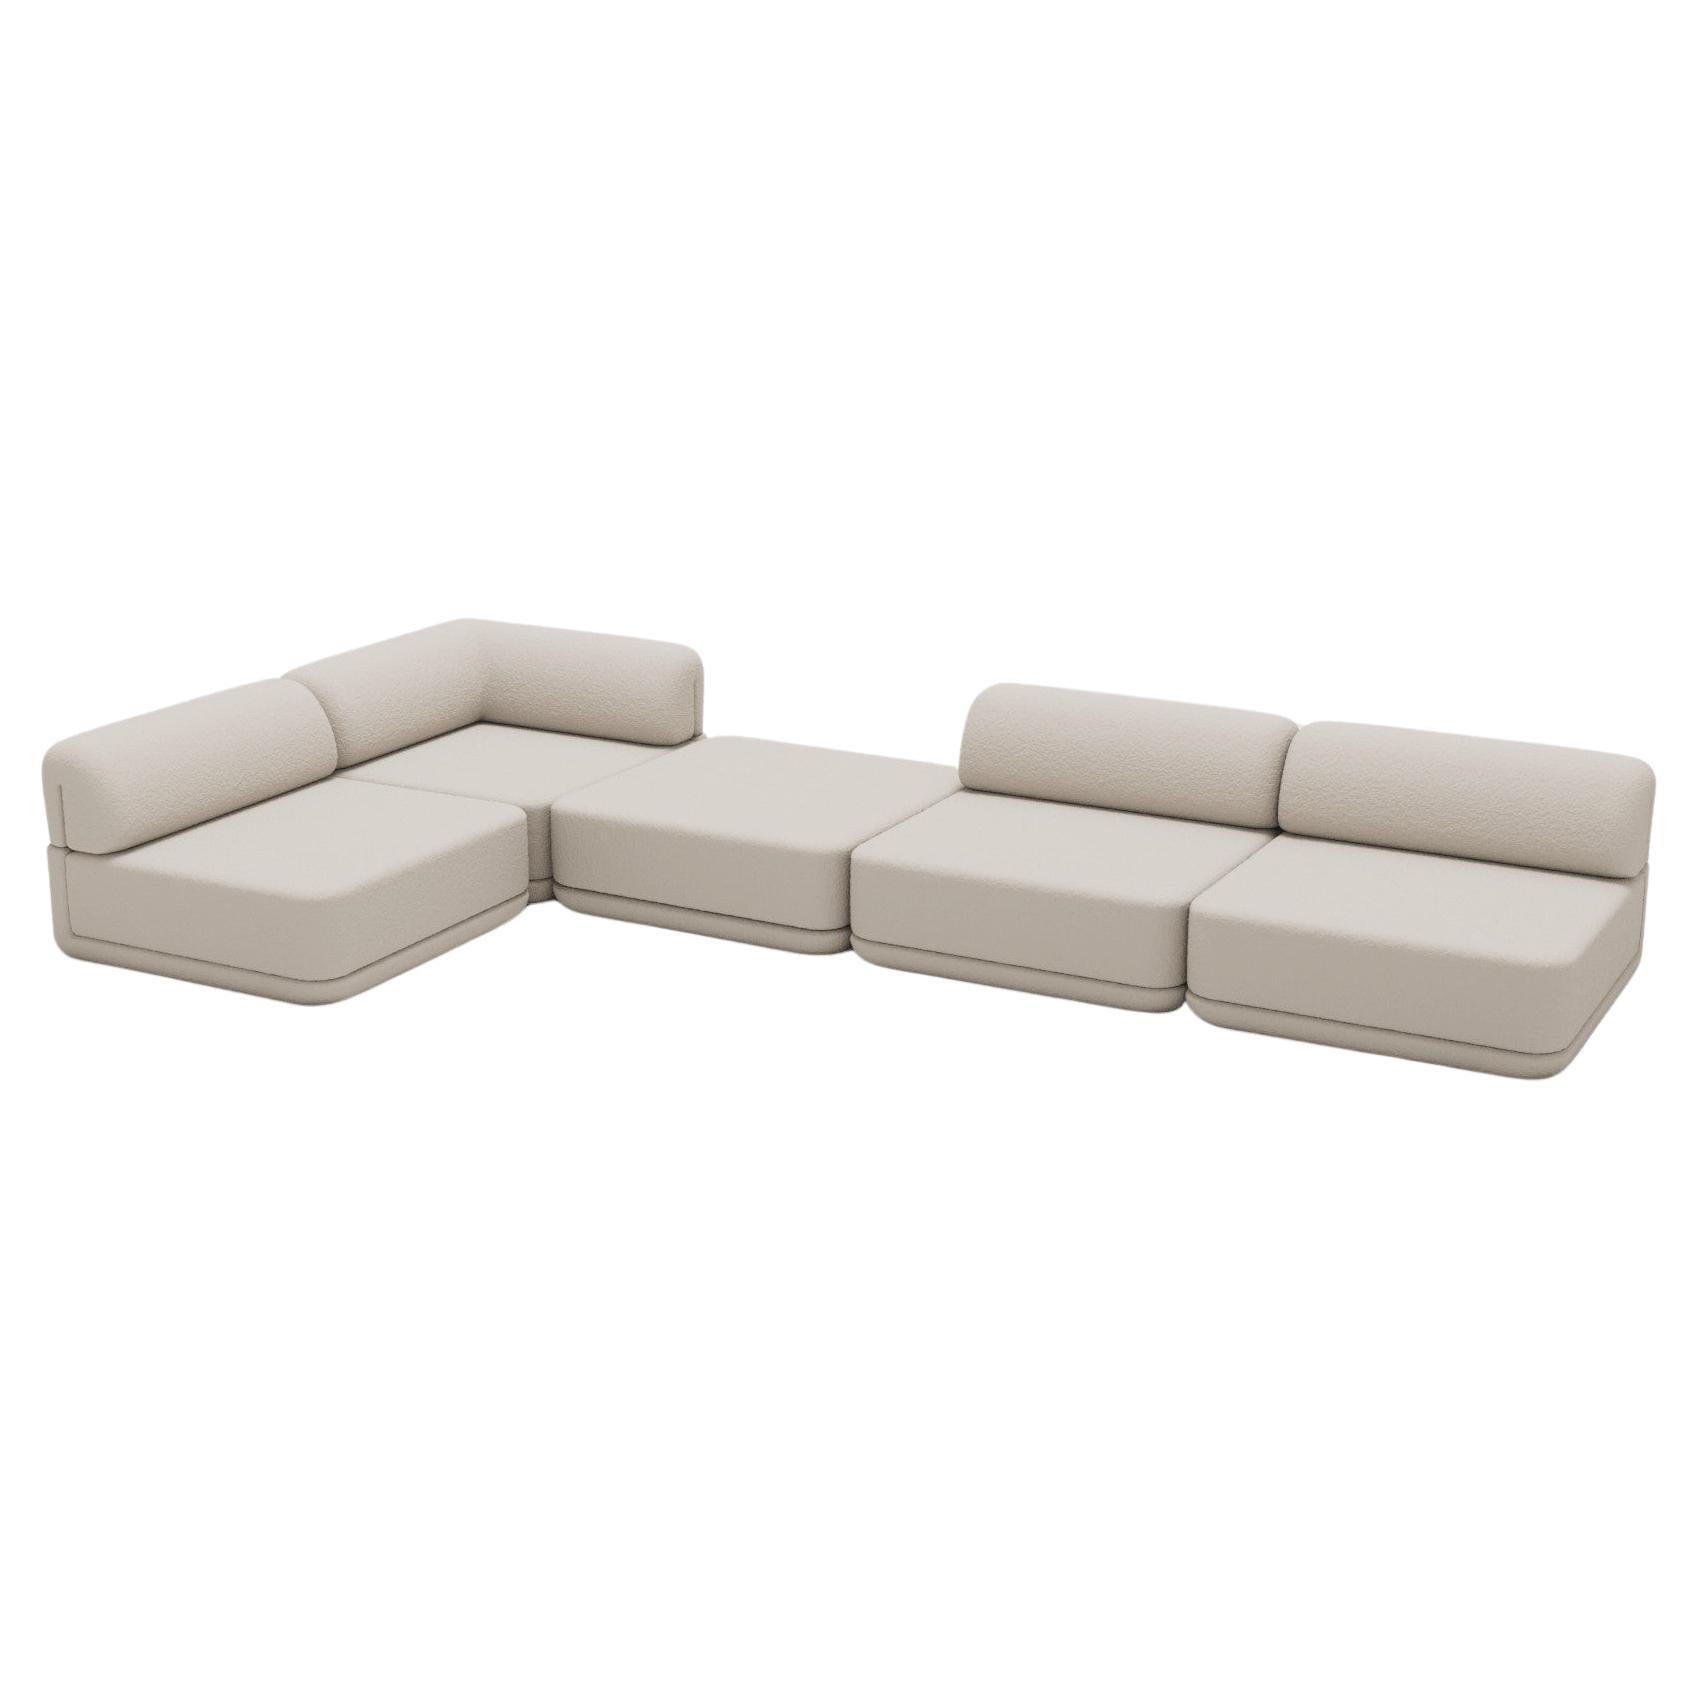 The Cube Sofa - Corner Lounge Mix Sectional For Sale